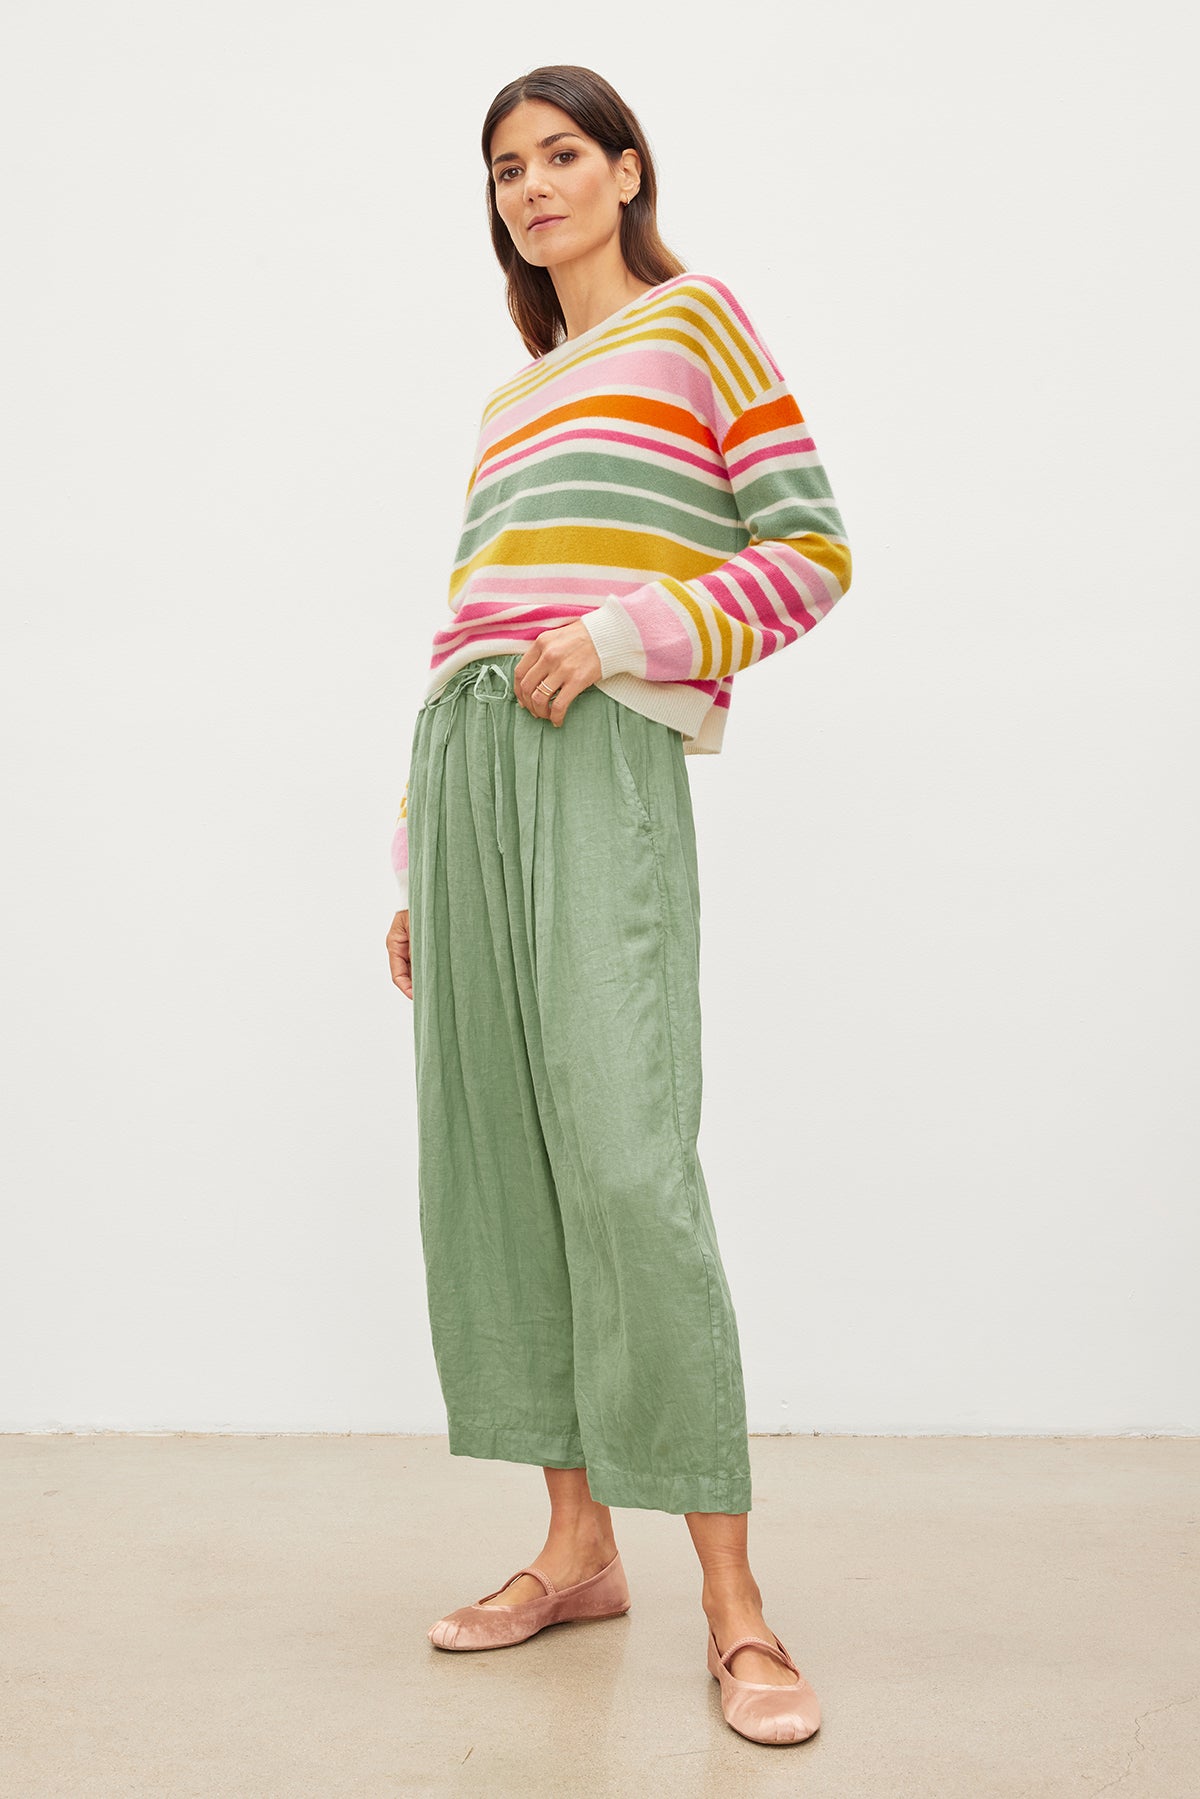   The model is wearing a Velvet by Graham & Spencer Hannah Linen Wide Leg Pant, featuring double pleats. 